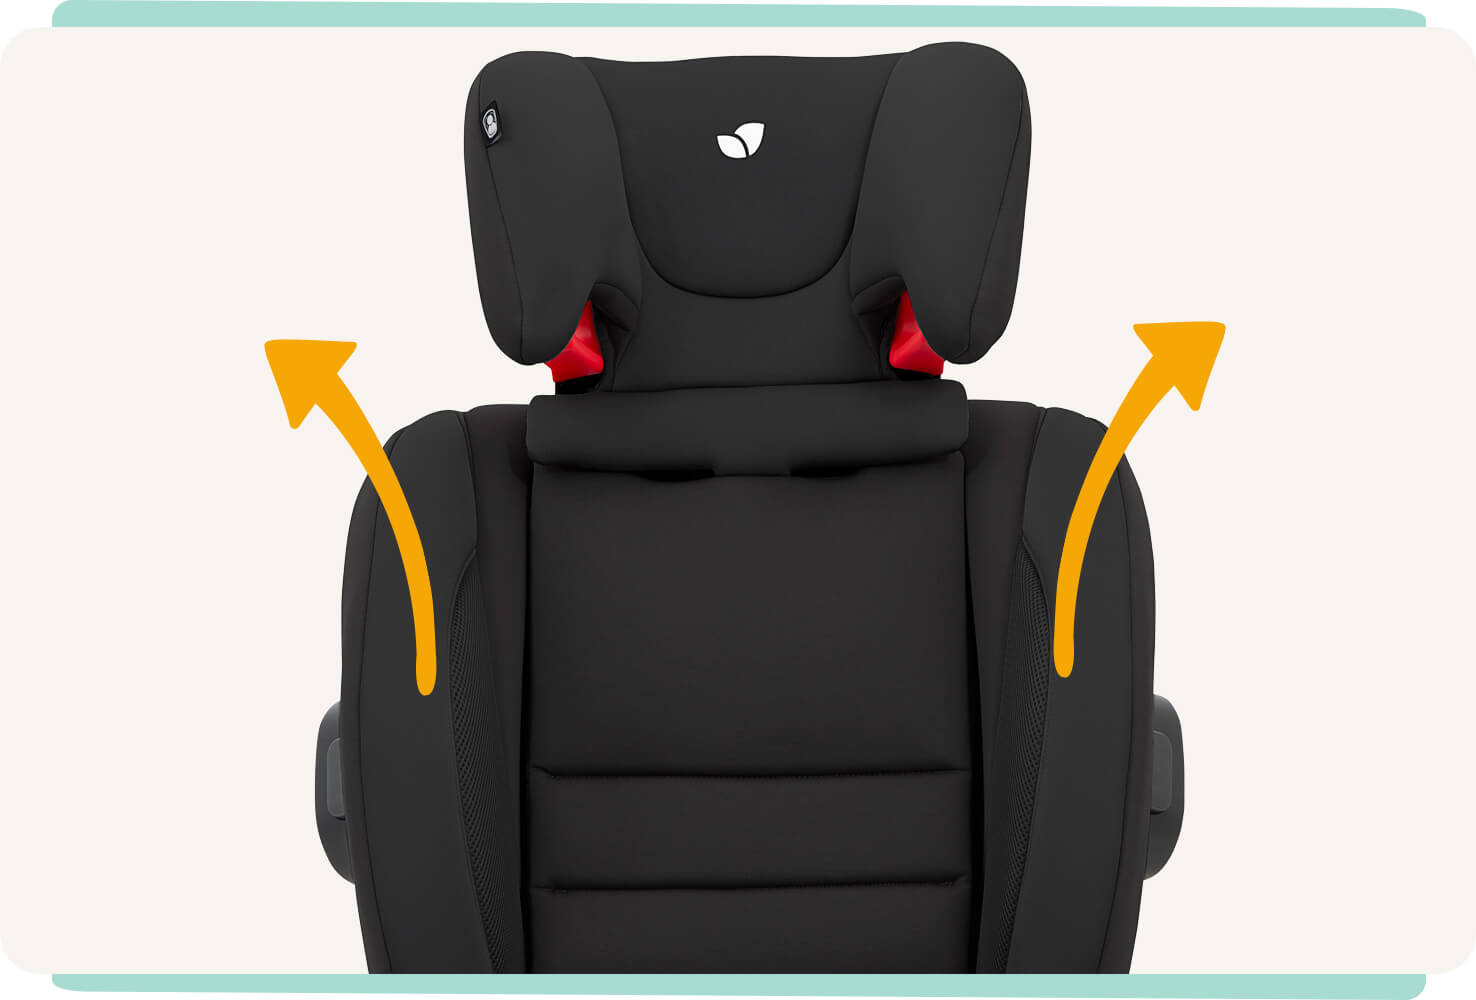 Front view of fortifi R child car seat with headrest partially raised and two arrows pointing up and out.